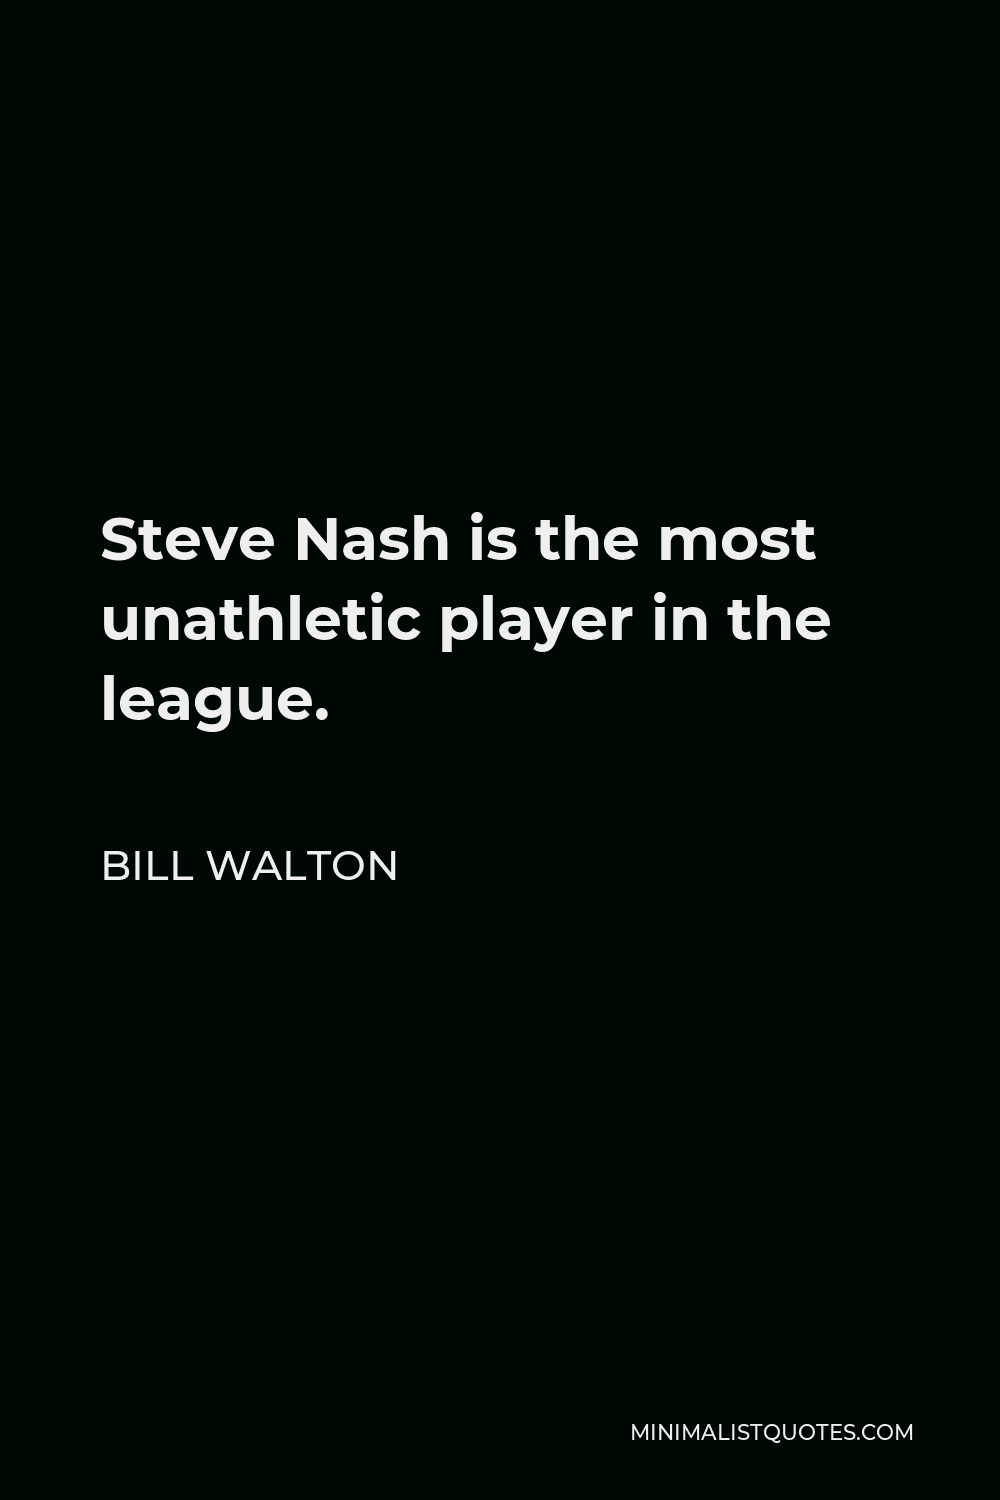 Bill Walton Quote - Steve Nash is the most unathletic player in the league.